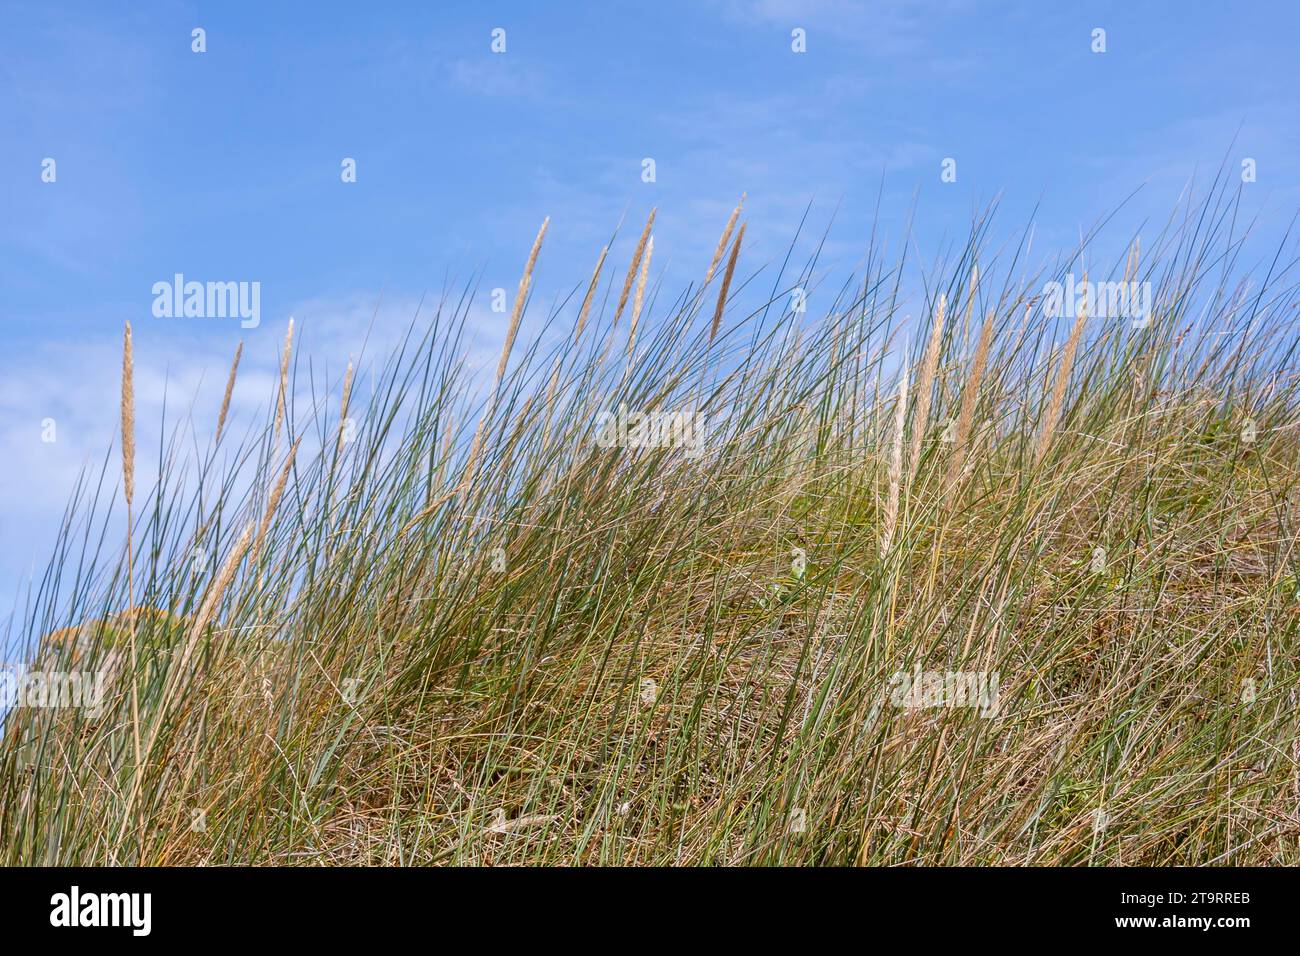 Marram grass (Ammophila arenaria) on a dune, Brittany, France Stock Photo